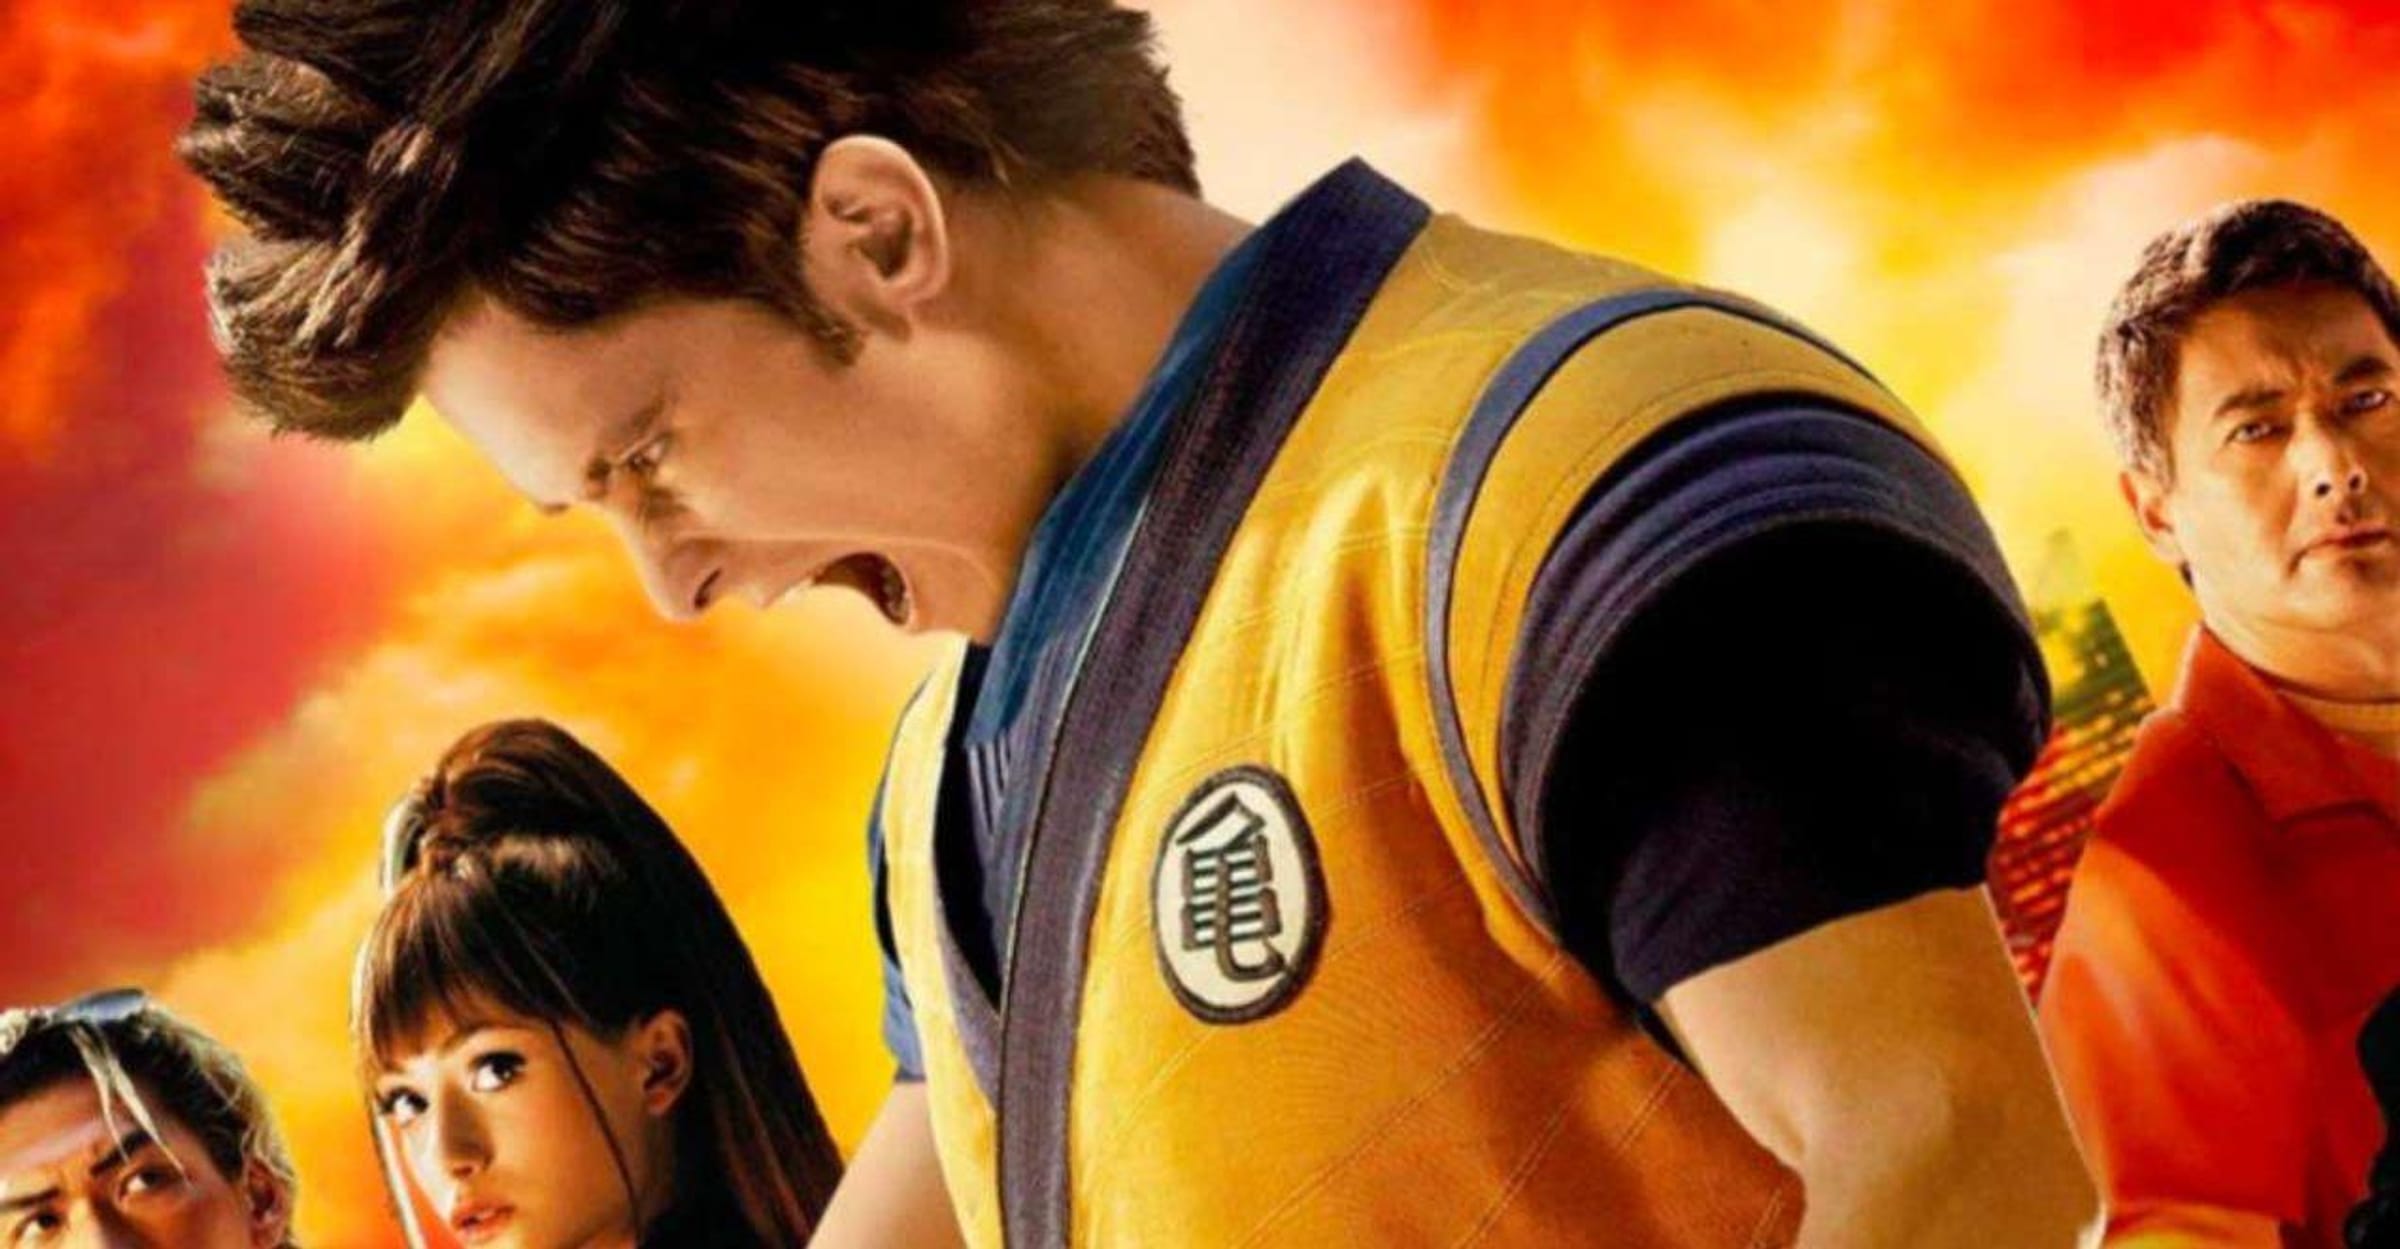 Dragonball Evolution' Might Be The Worst Anime Adaptation Ever